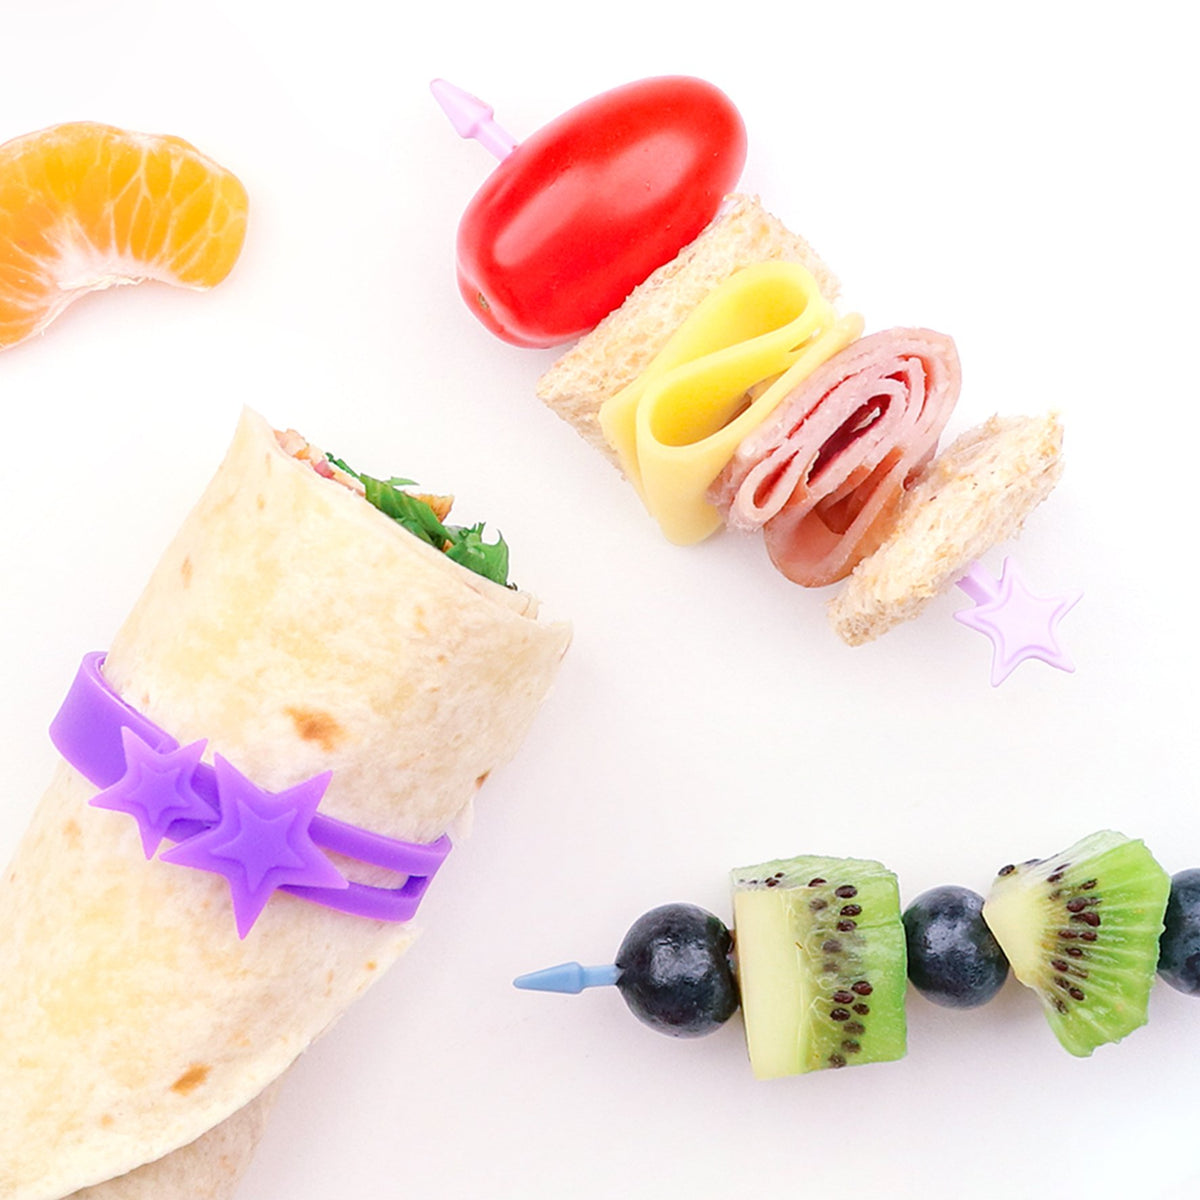 Lunch Punch Wrap Bands